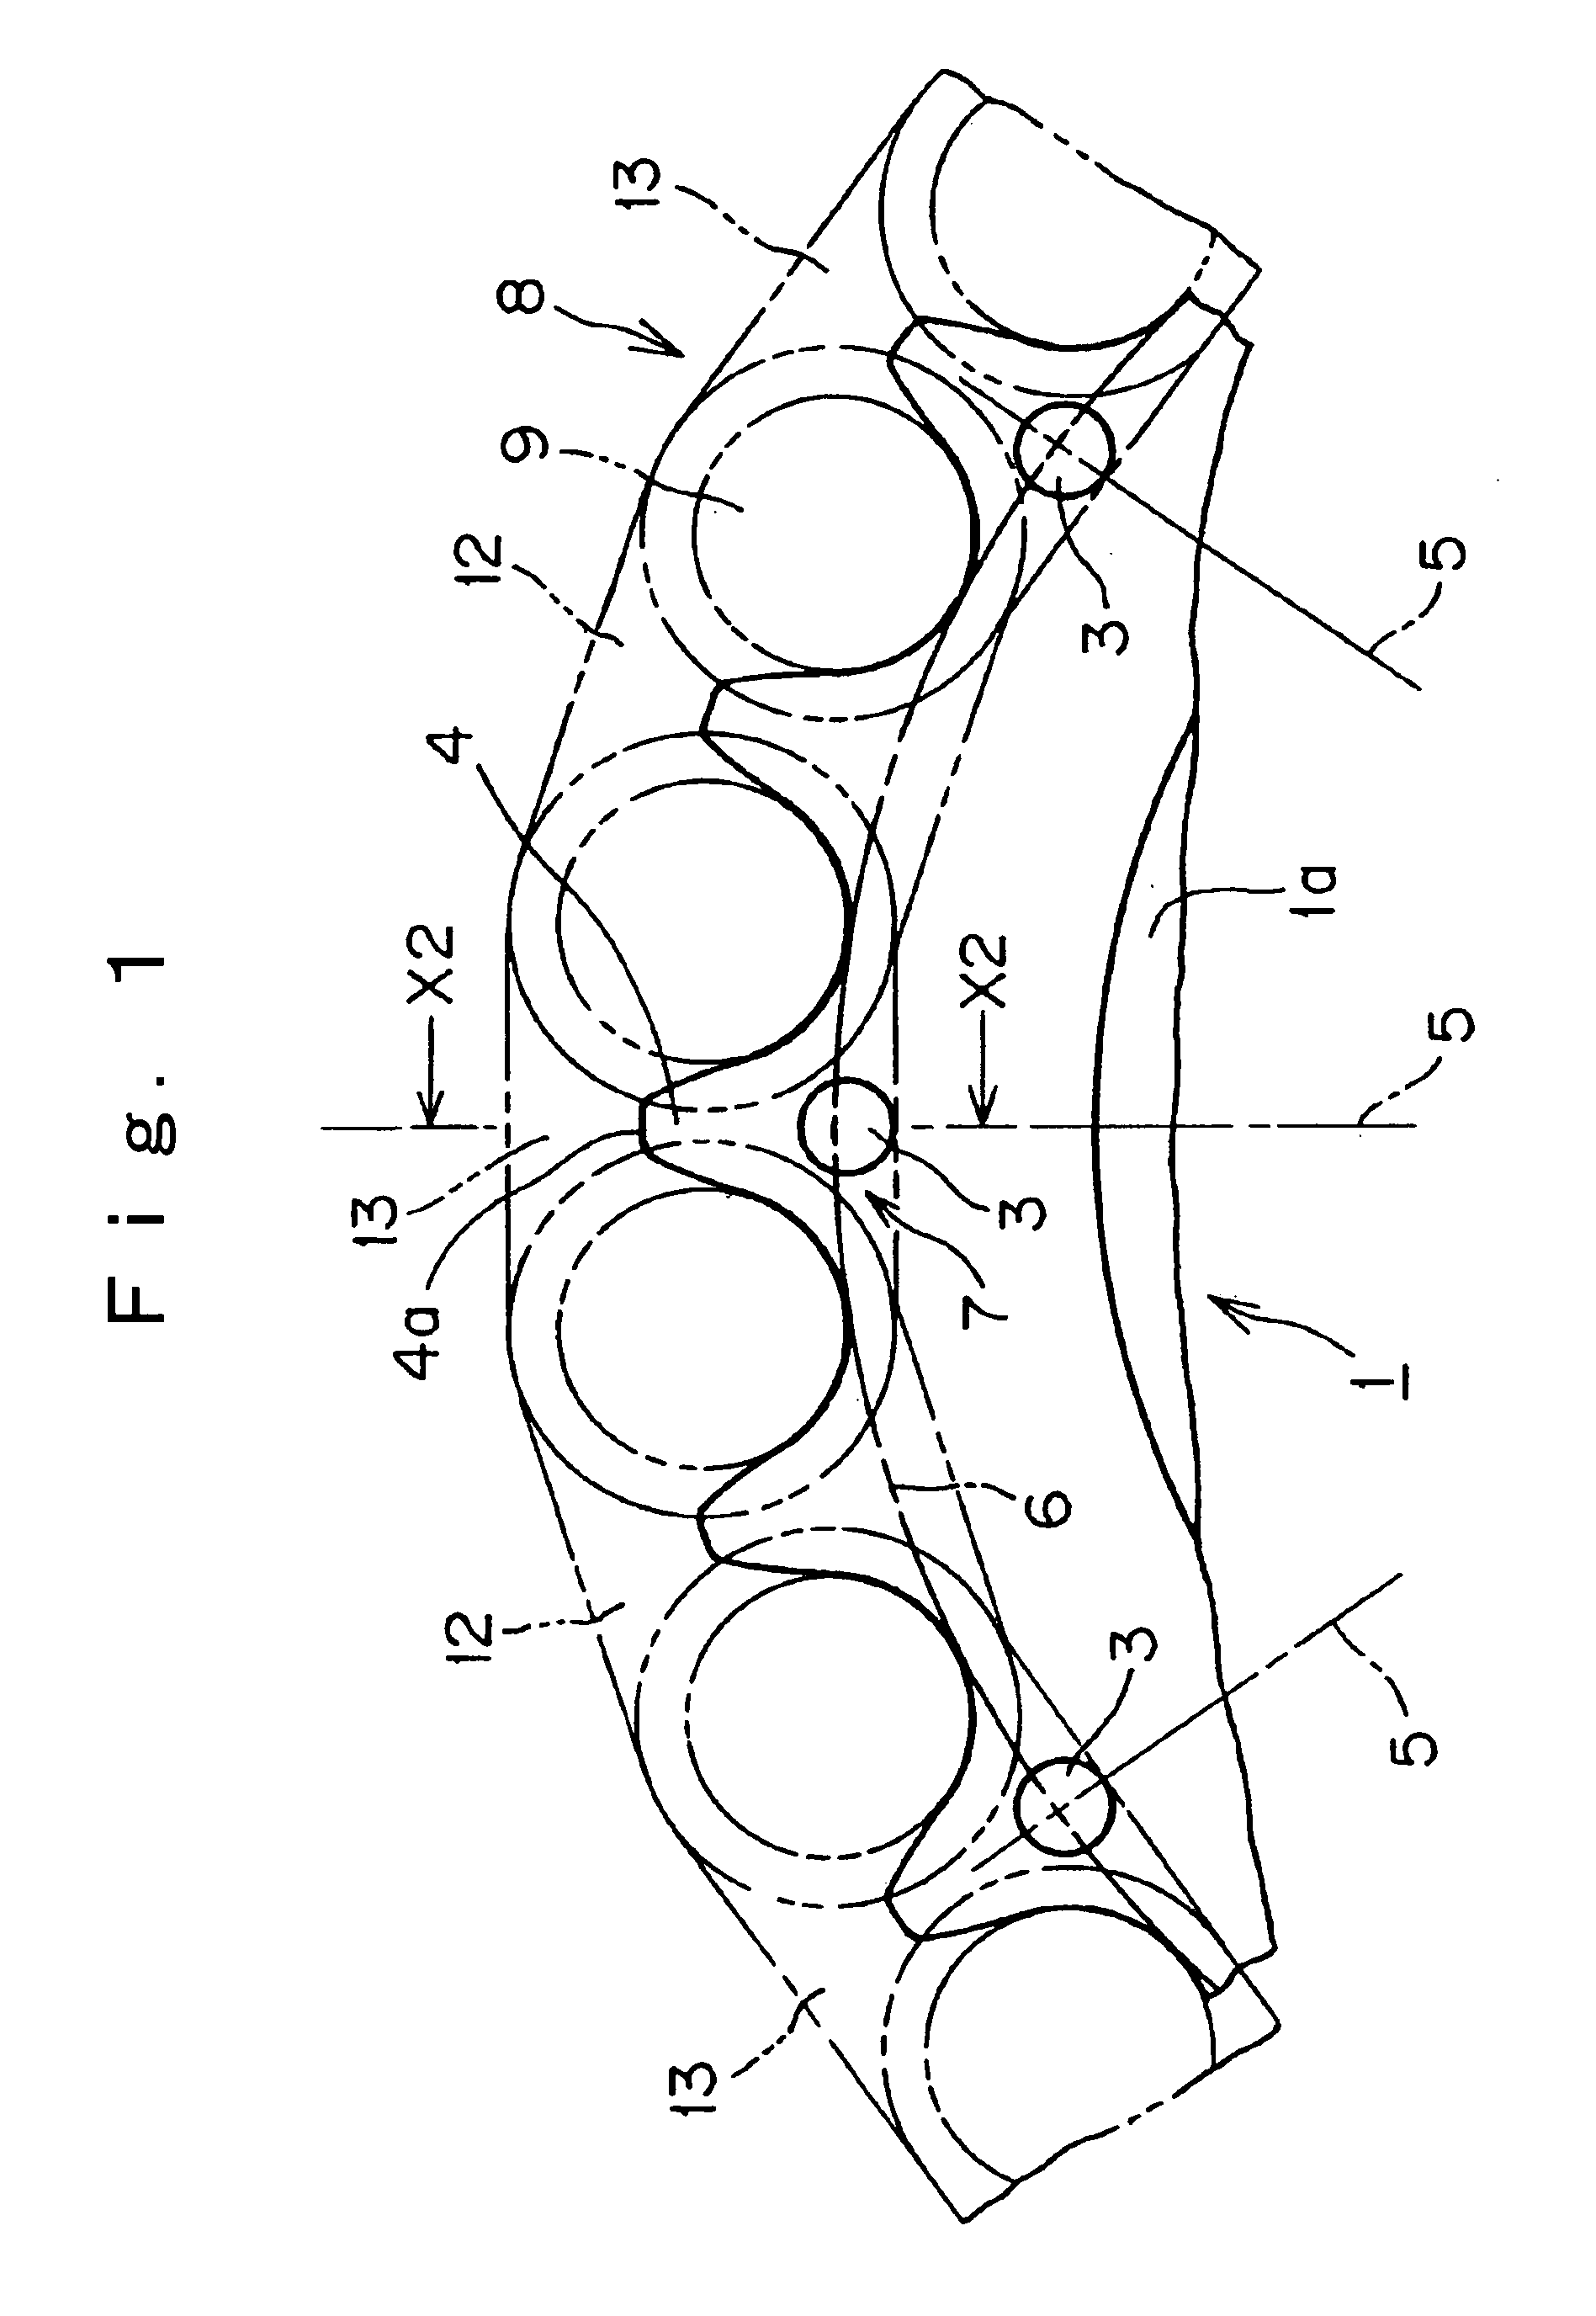 Sintered sprocket with protrusions